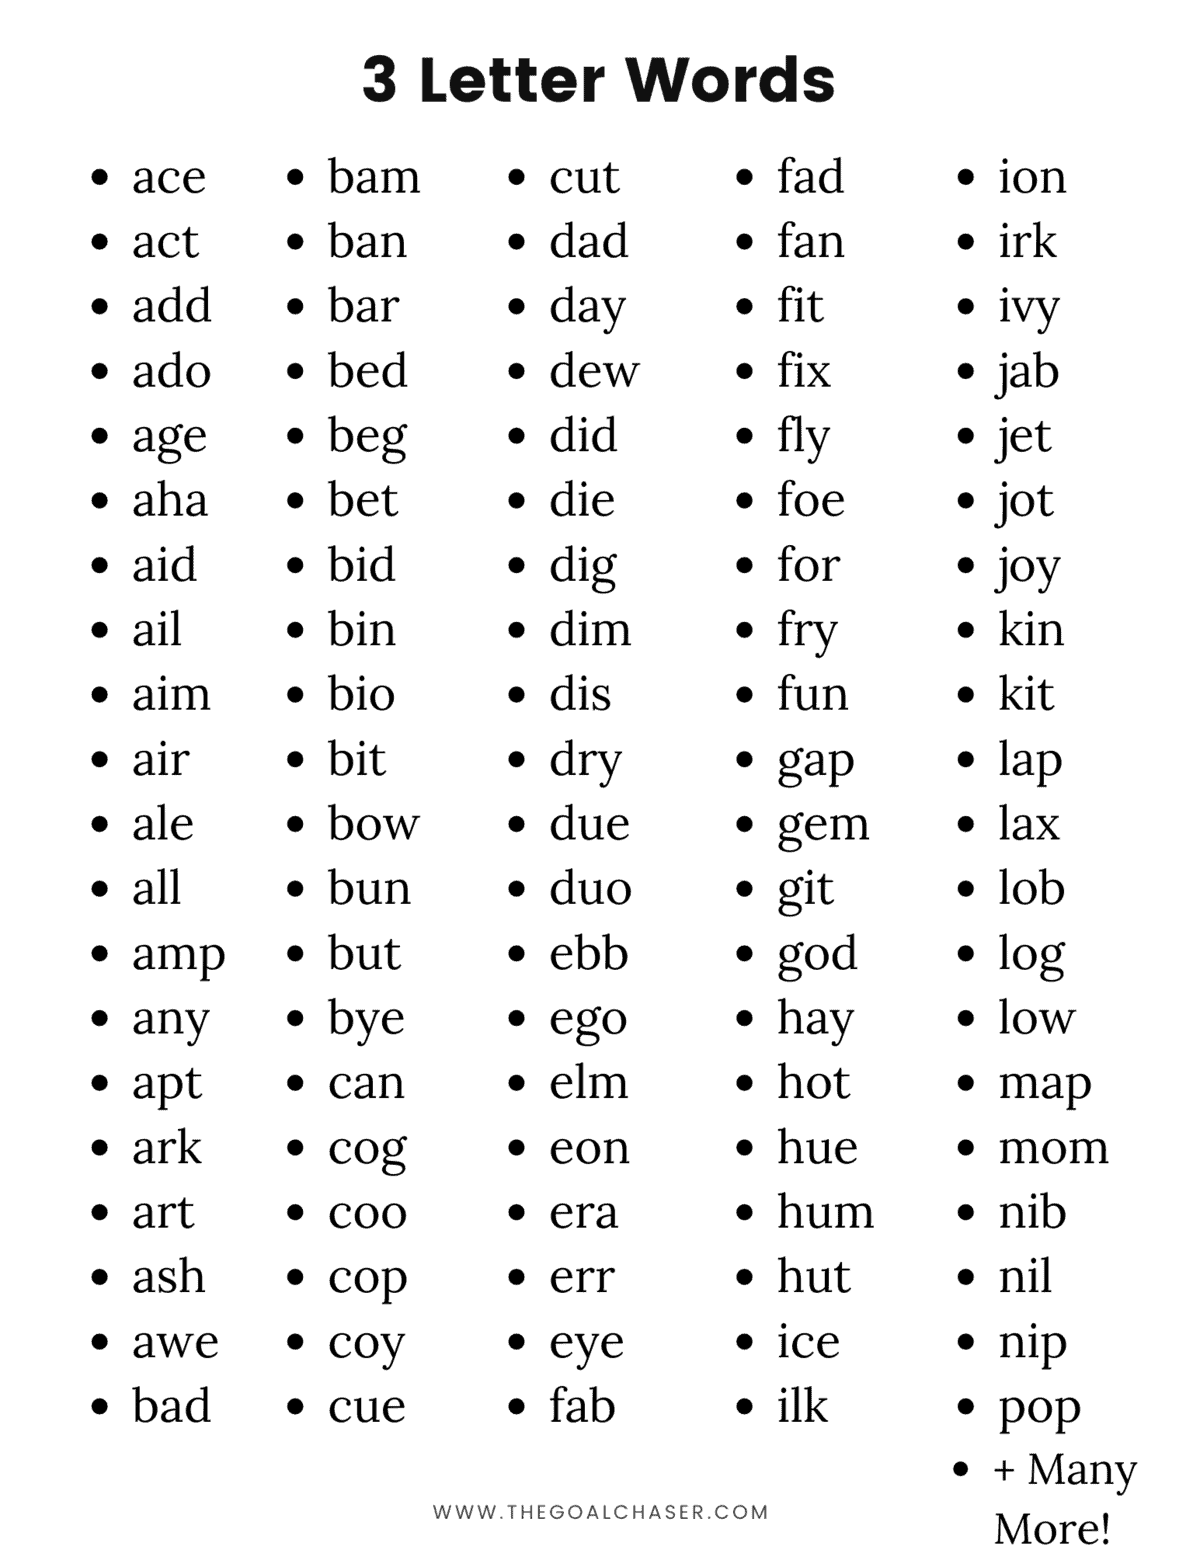 List Of Three Letter Words In Alphabetical Order